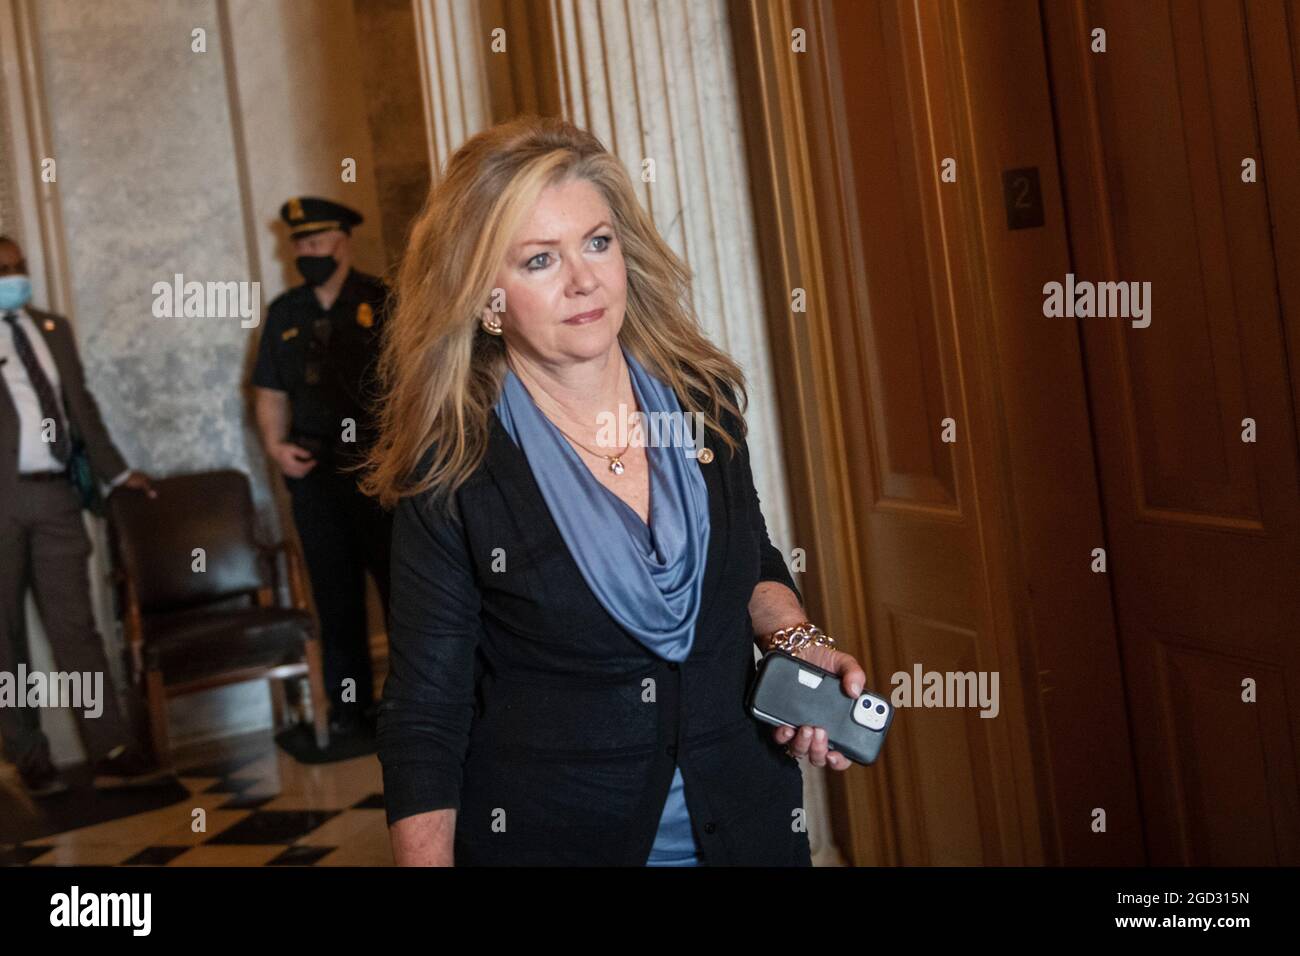 United States Senator Marsha Blackburn (Republican of Tennessee) departs the Senate chamber during a vote at the US Capitol in Washington, DC, Tuesday, August 10, 2021. The Senate is expected to vote today on final passage of the bipartisan $1 trillion H.R. 3684, Infrastructure Investment and Jobs Act. the Credit: Rod Lamkey/CNP Stock Photo